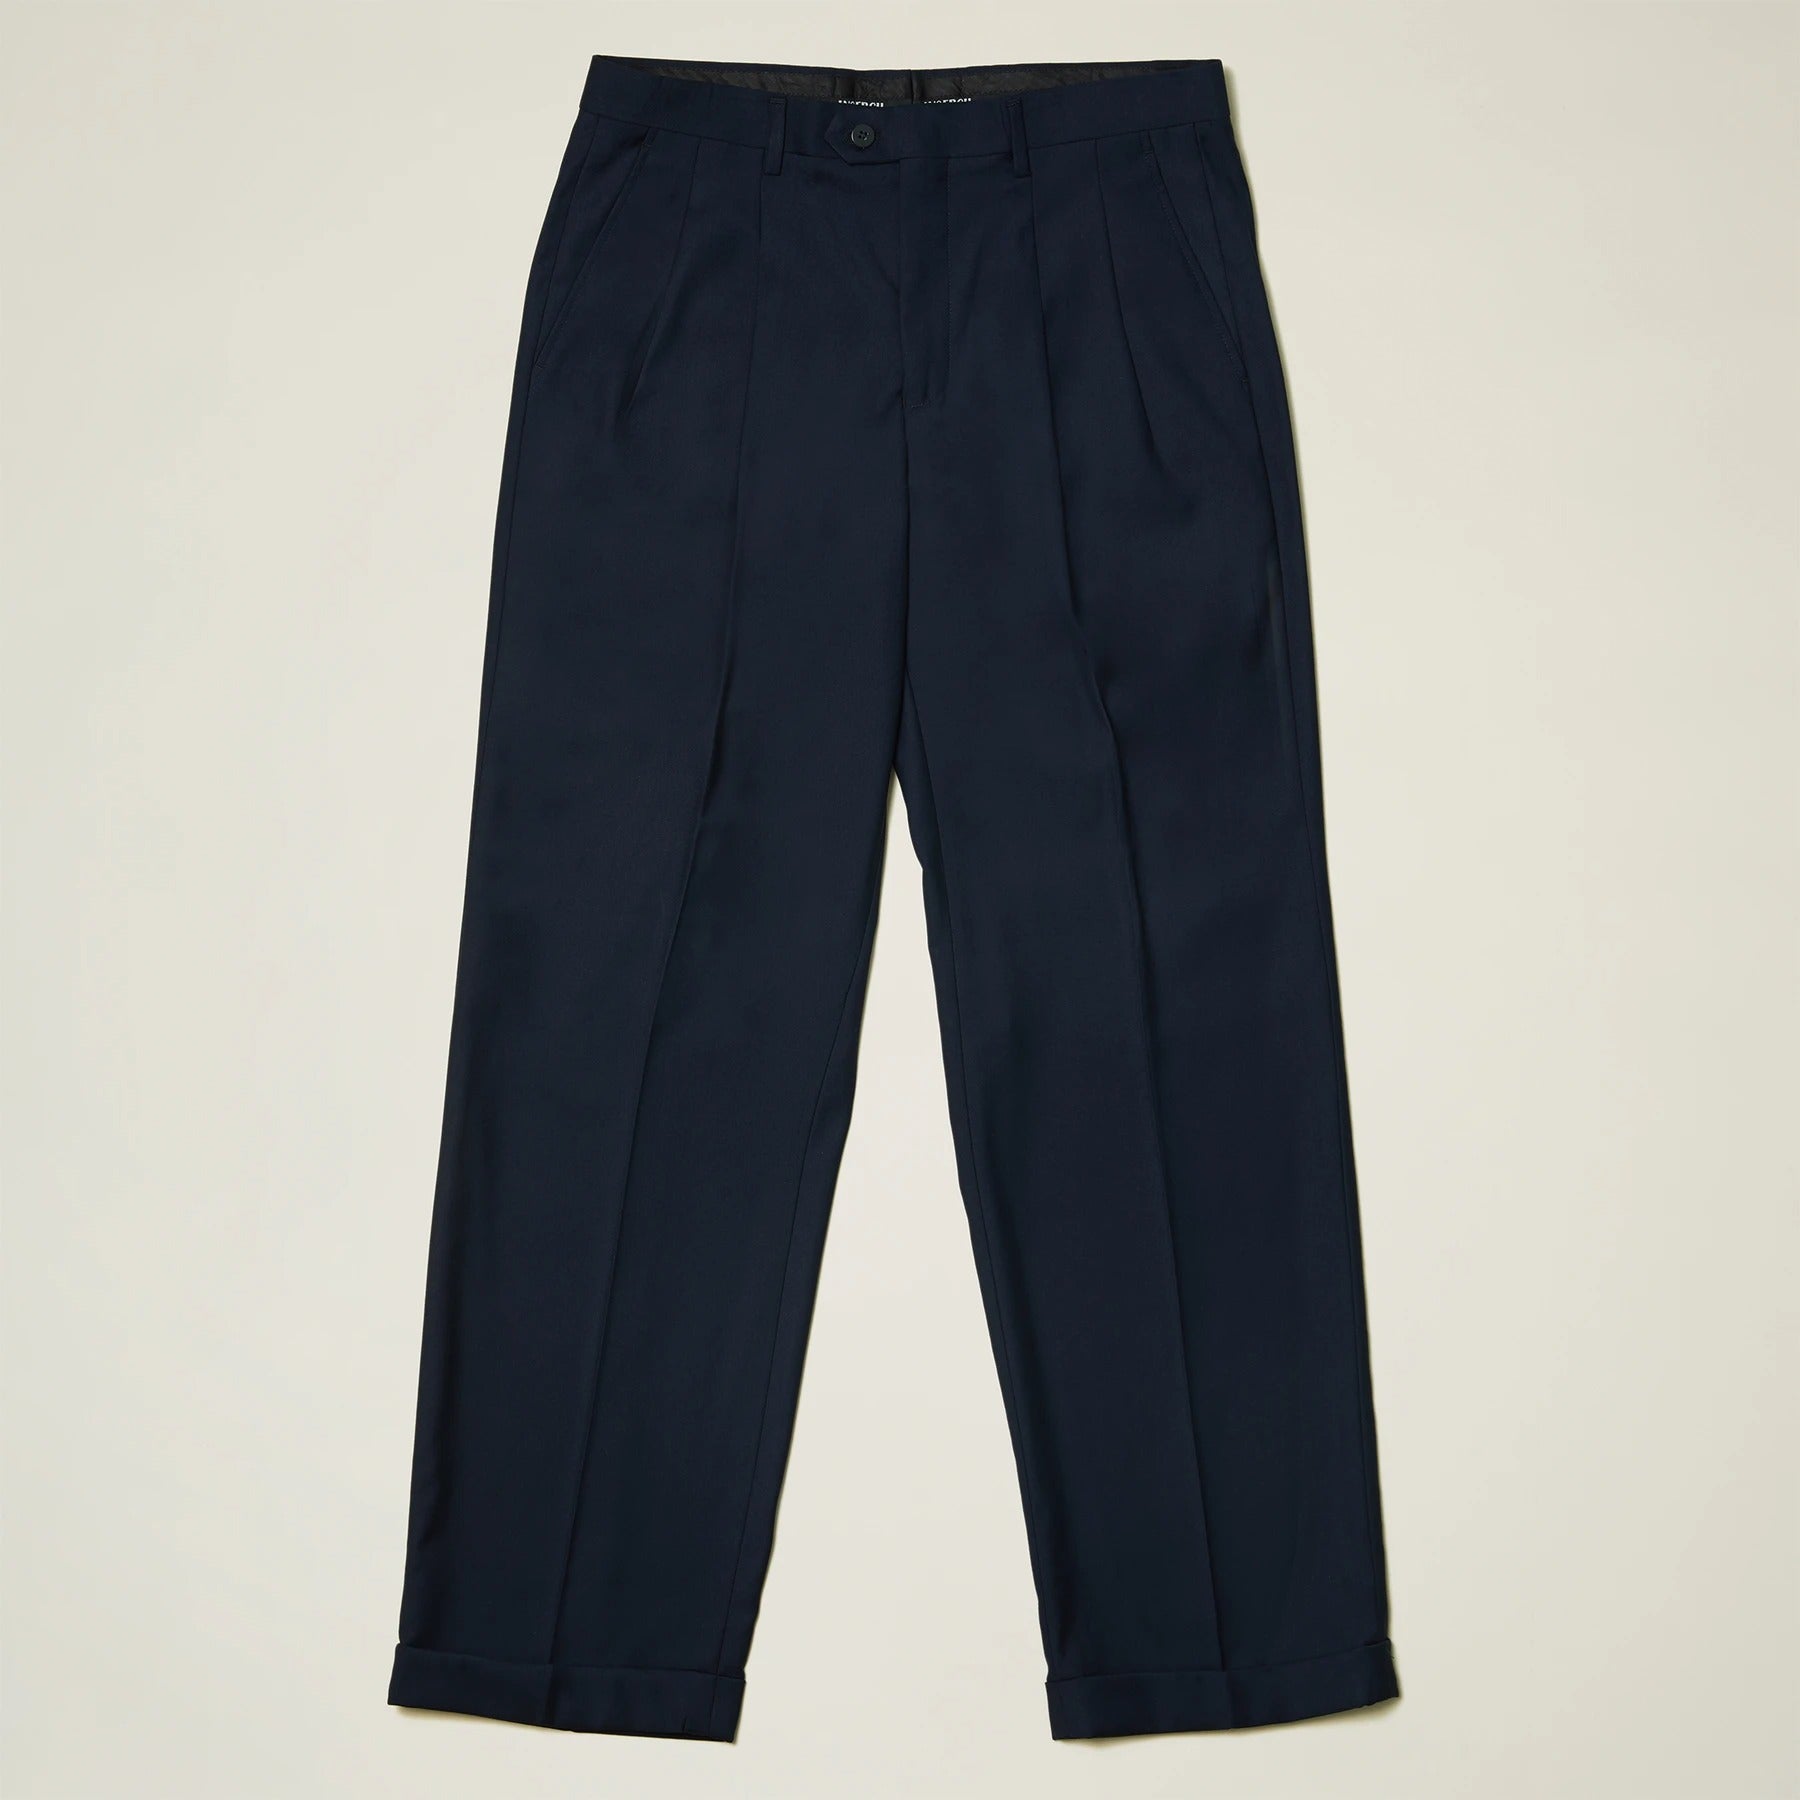 Inserch Solid Two-Pleat T/R Pants P1199-11 Navy